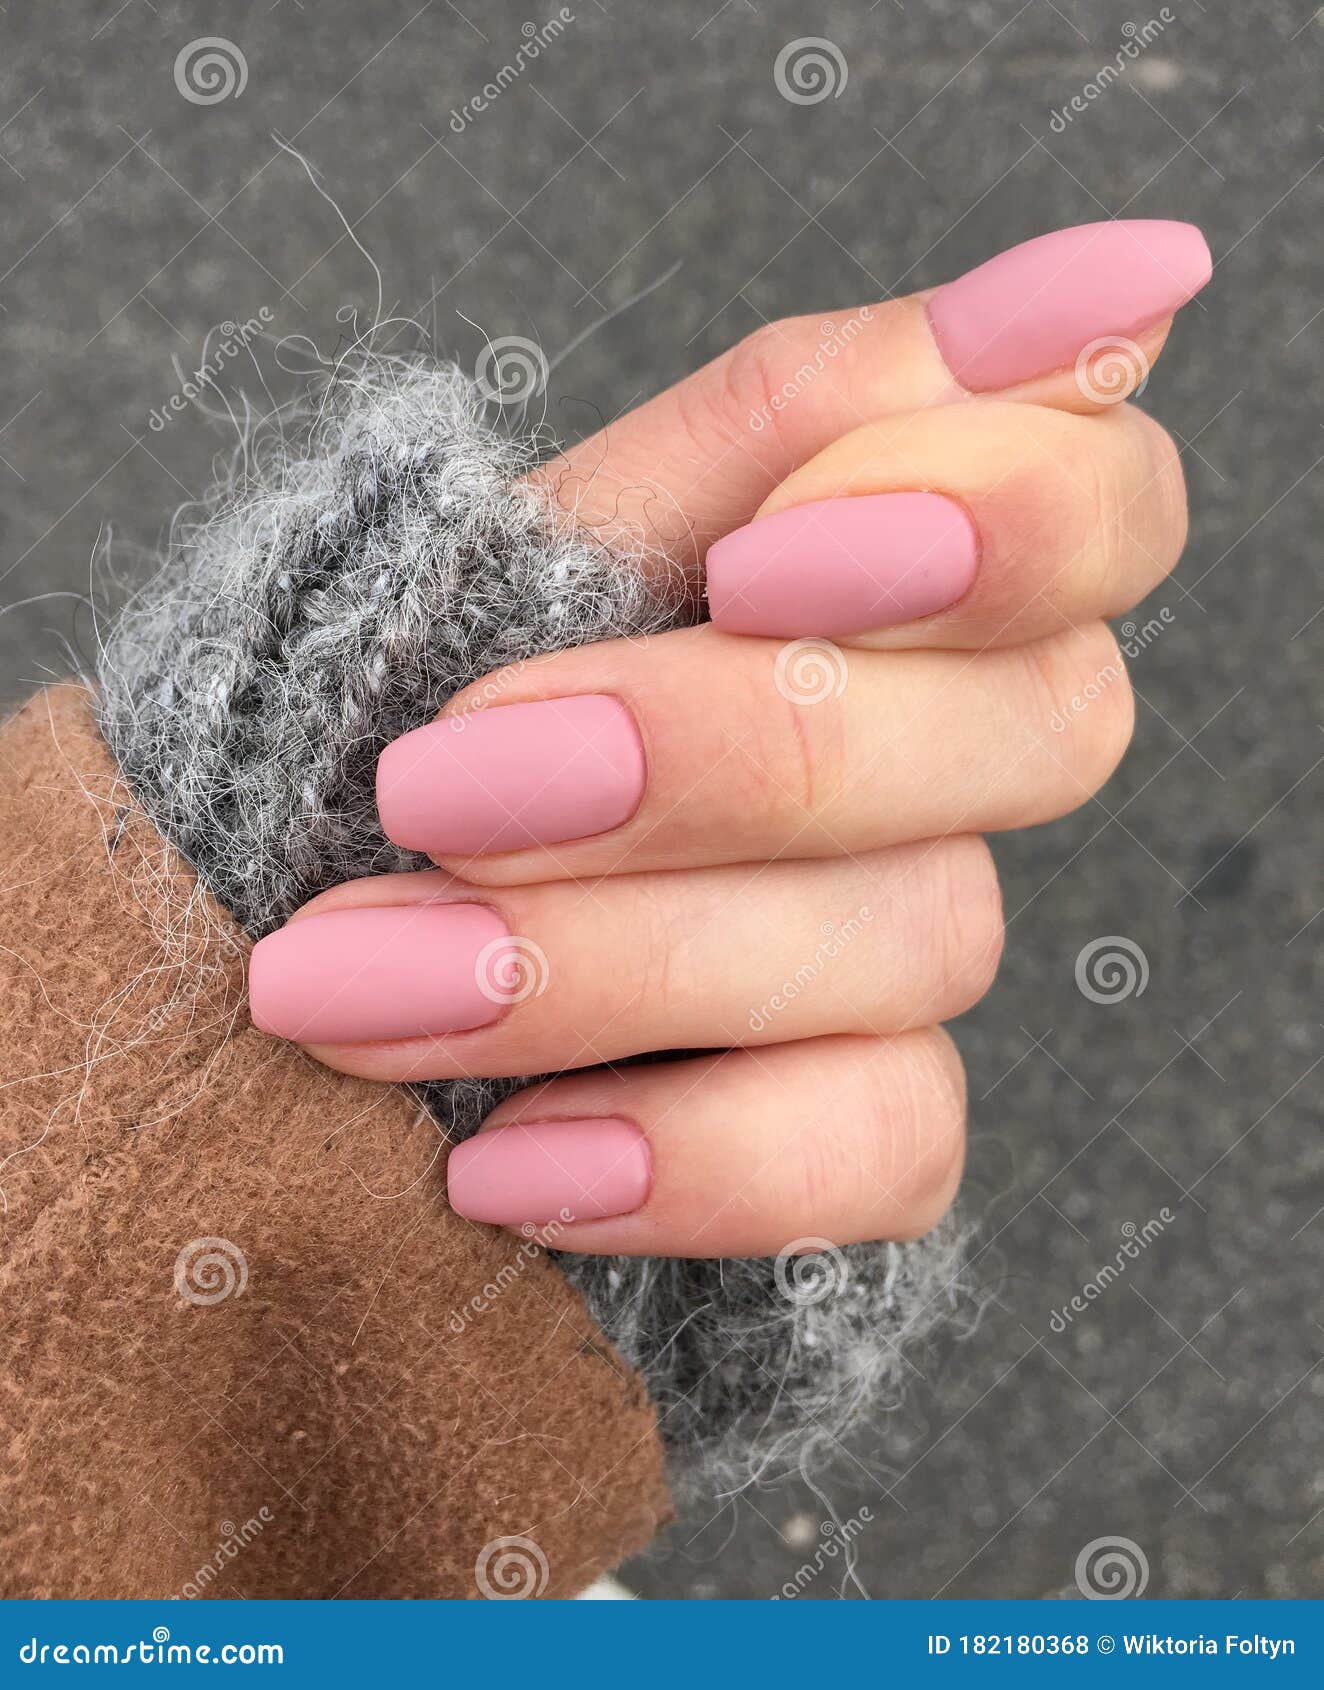 woman`s hand with pink manicure